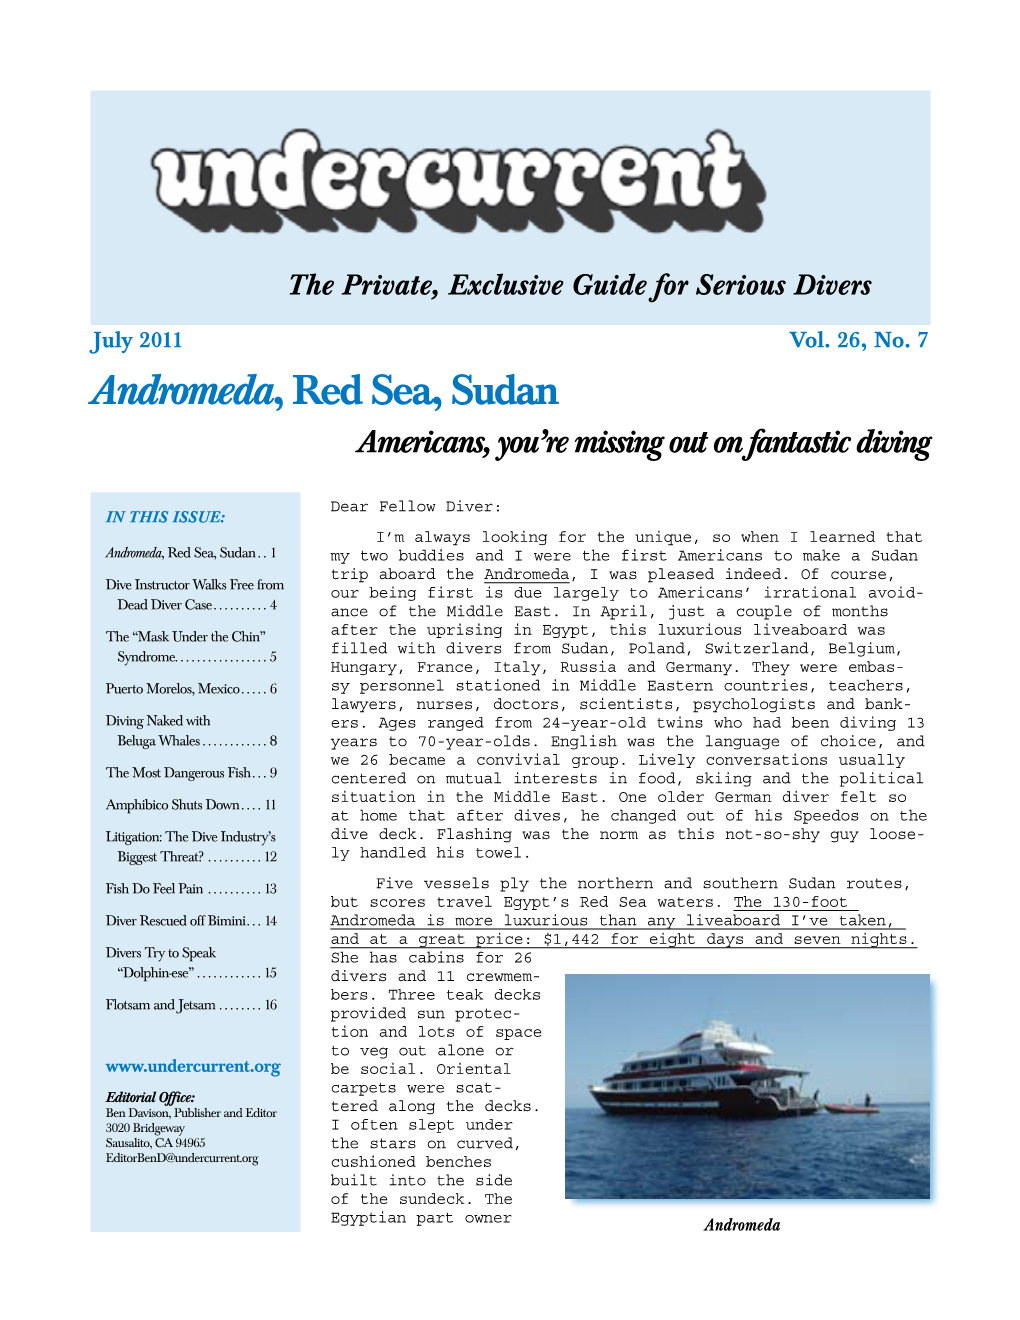 Andromeda, Red Sea, Sudan + [Other Articles] Undercurrent, July 2011